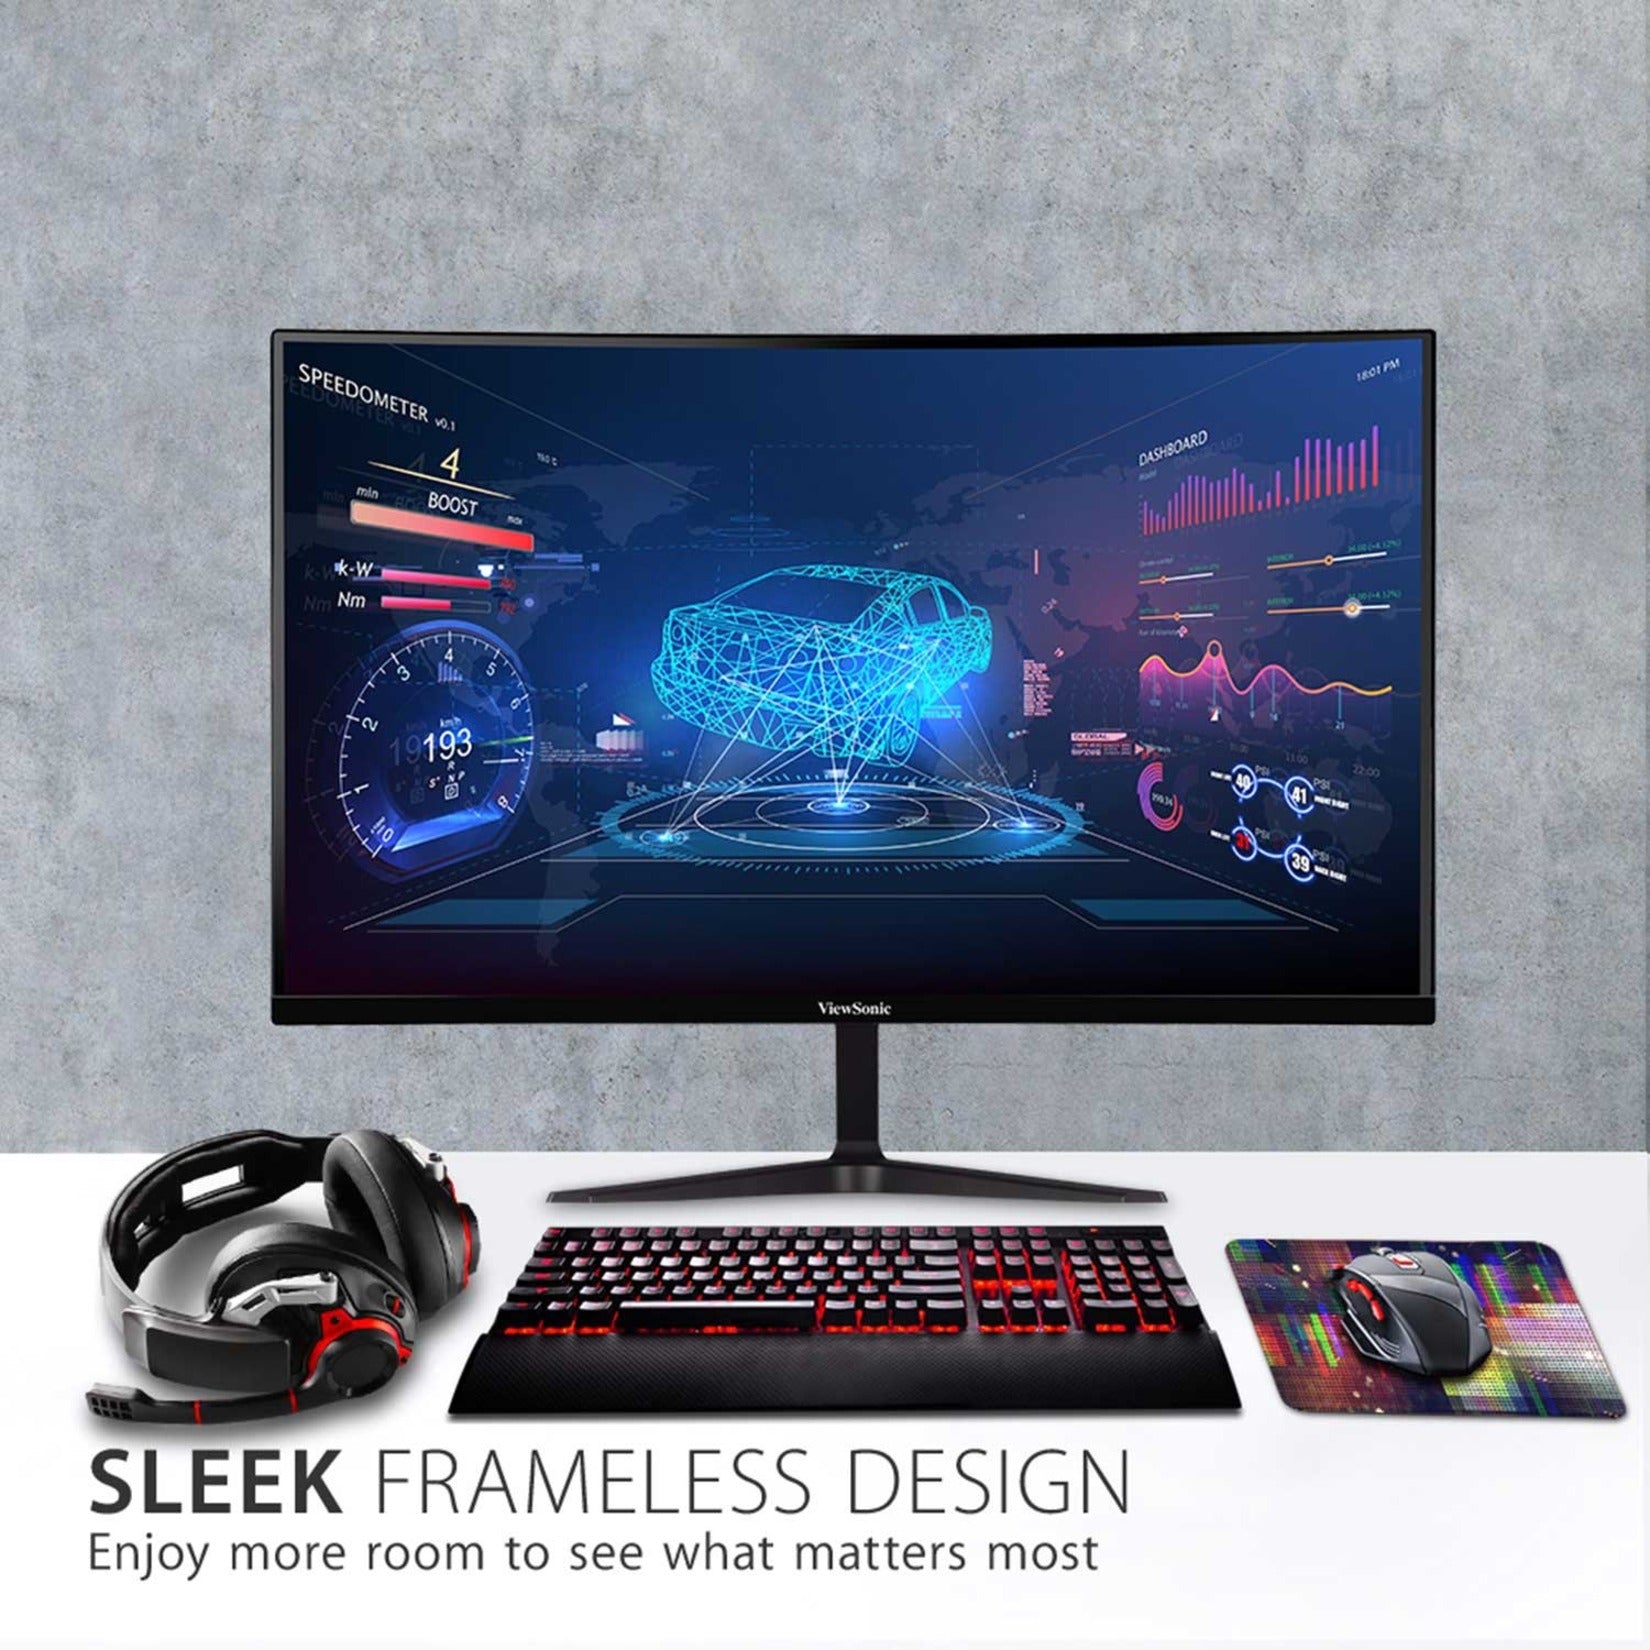 ViewSonic VX2718-PC-MHD 27" Curved Gaming Monitor, 165Hz, 1920x1080 Resolution, 1ms Response Time